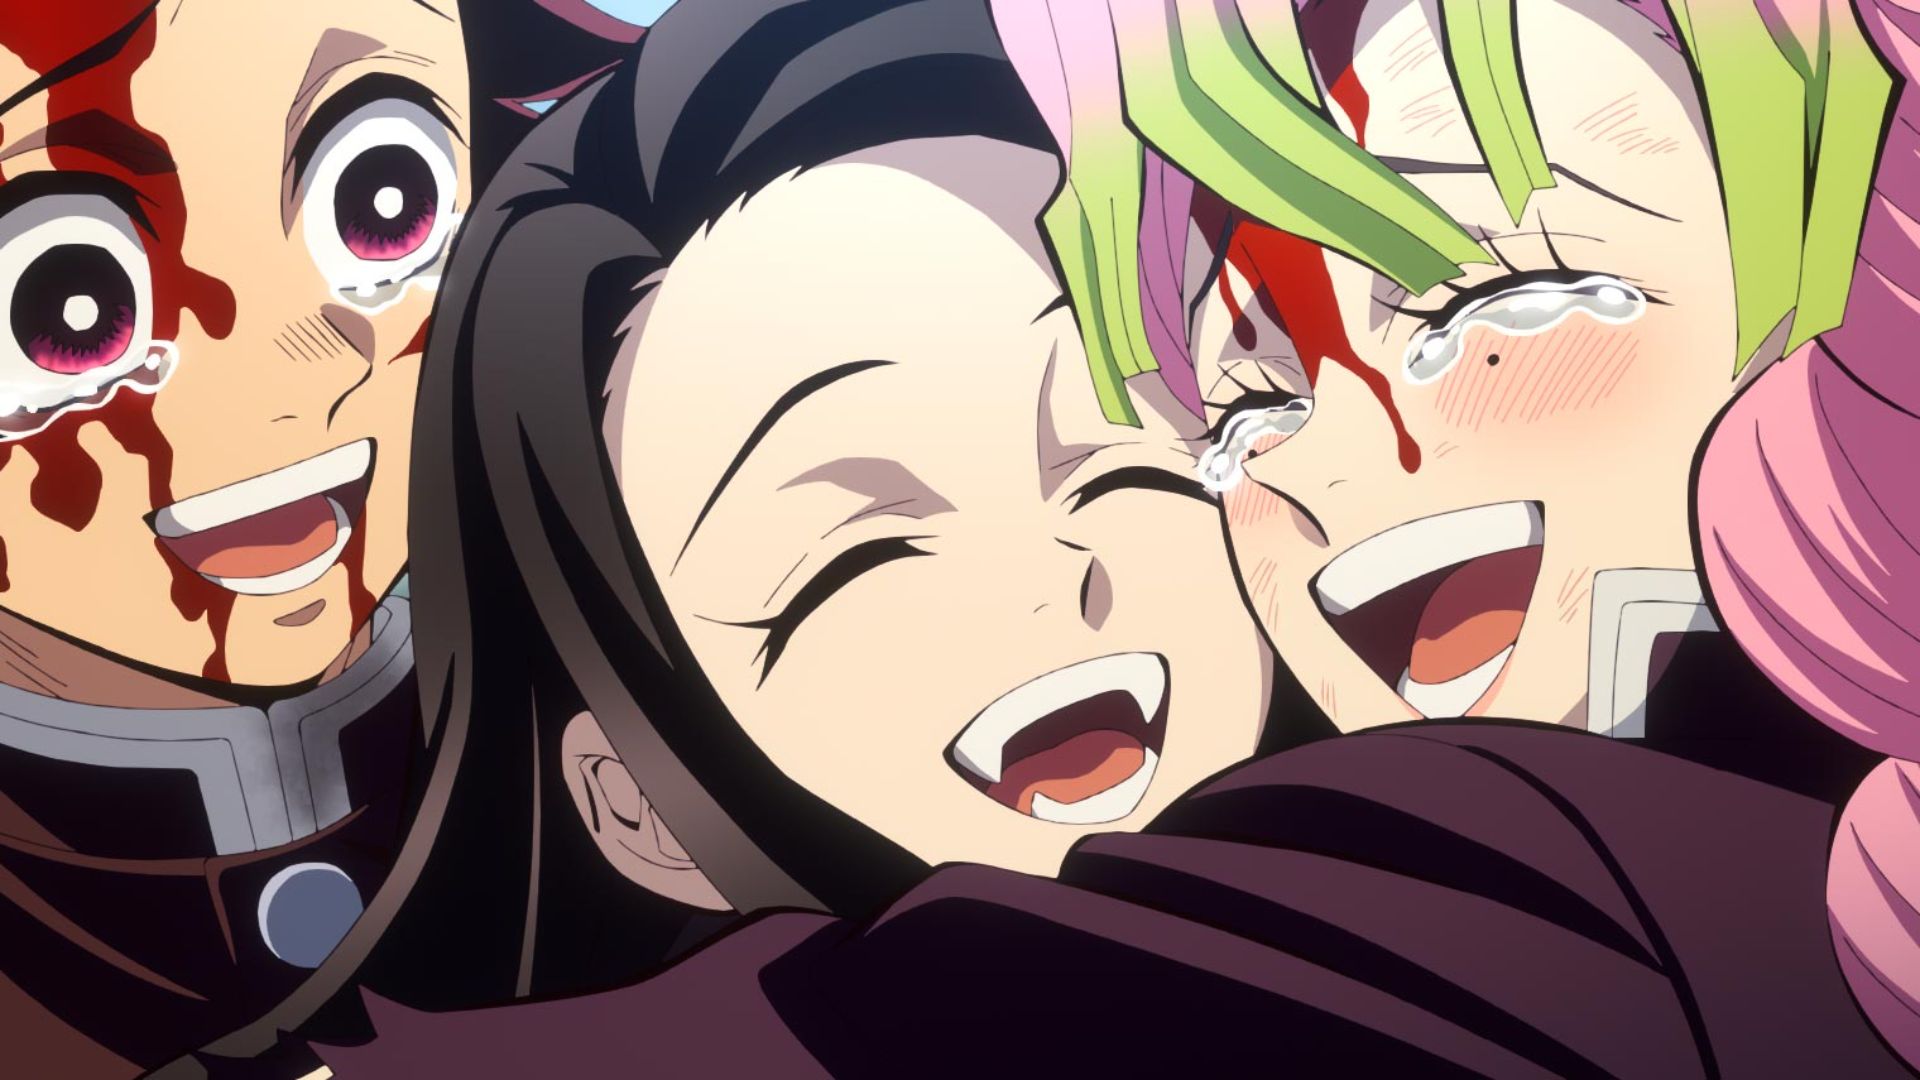 Demon Slayer season 4 release date, cast: Everything we know so